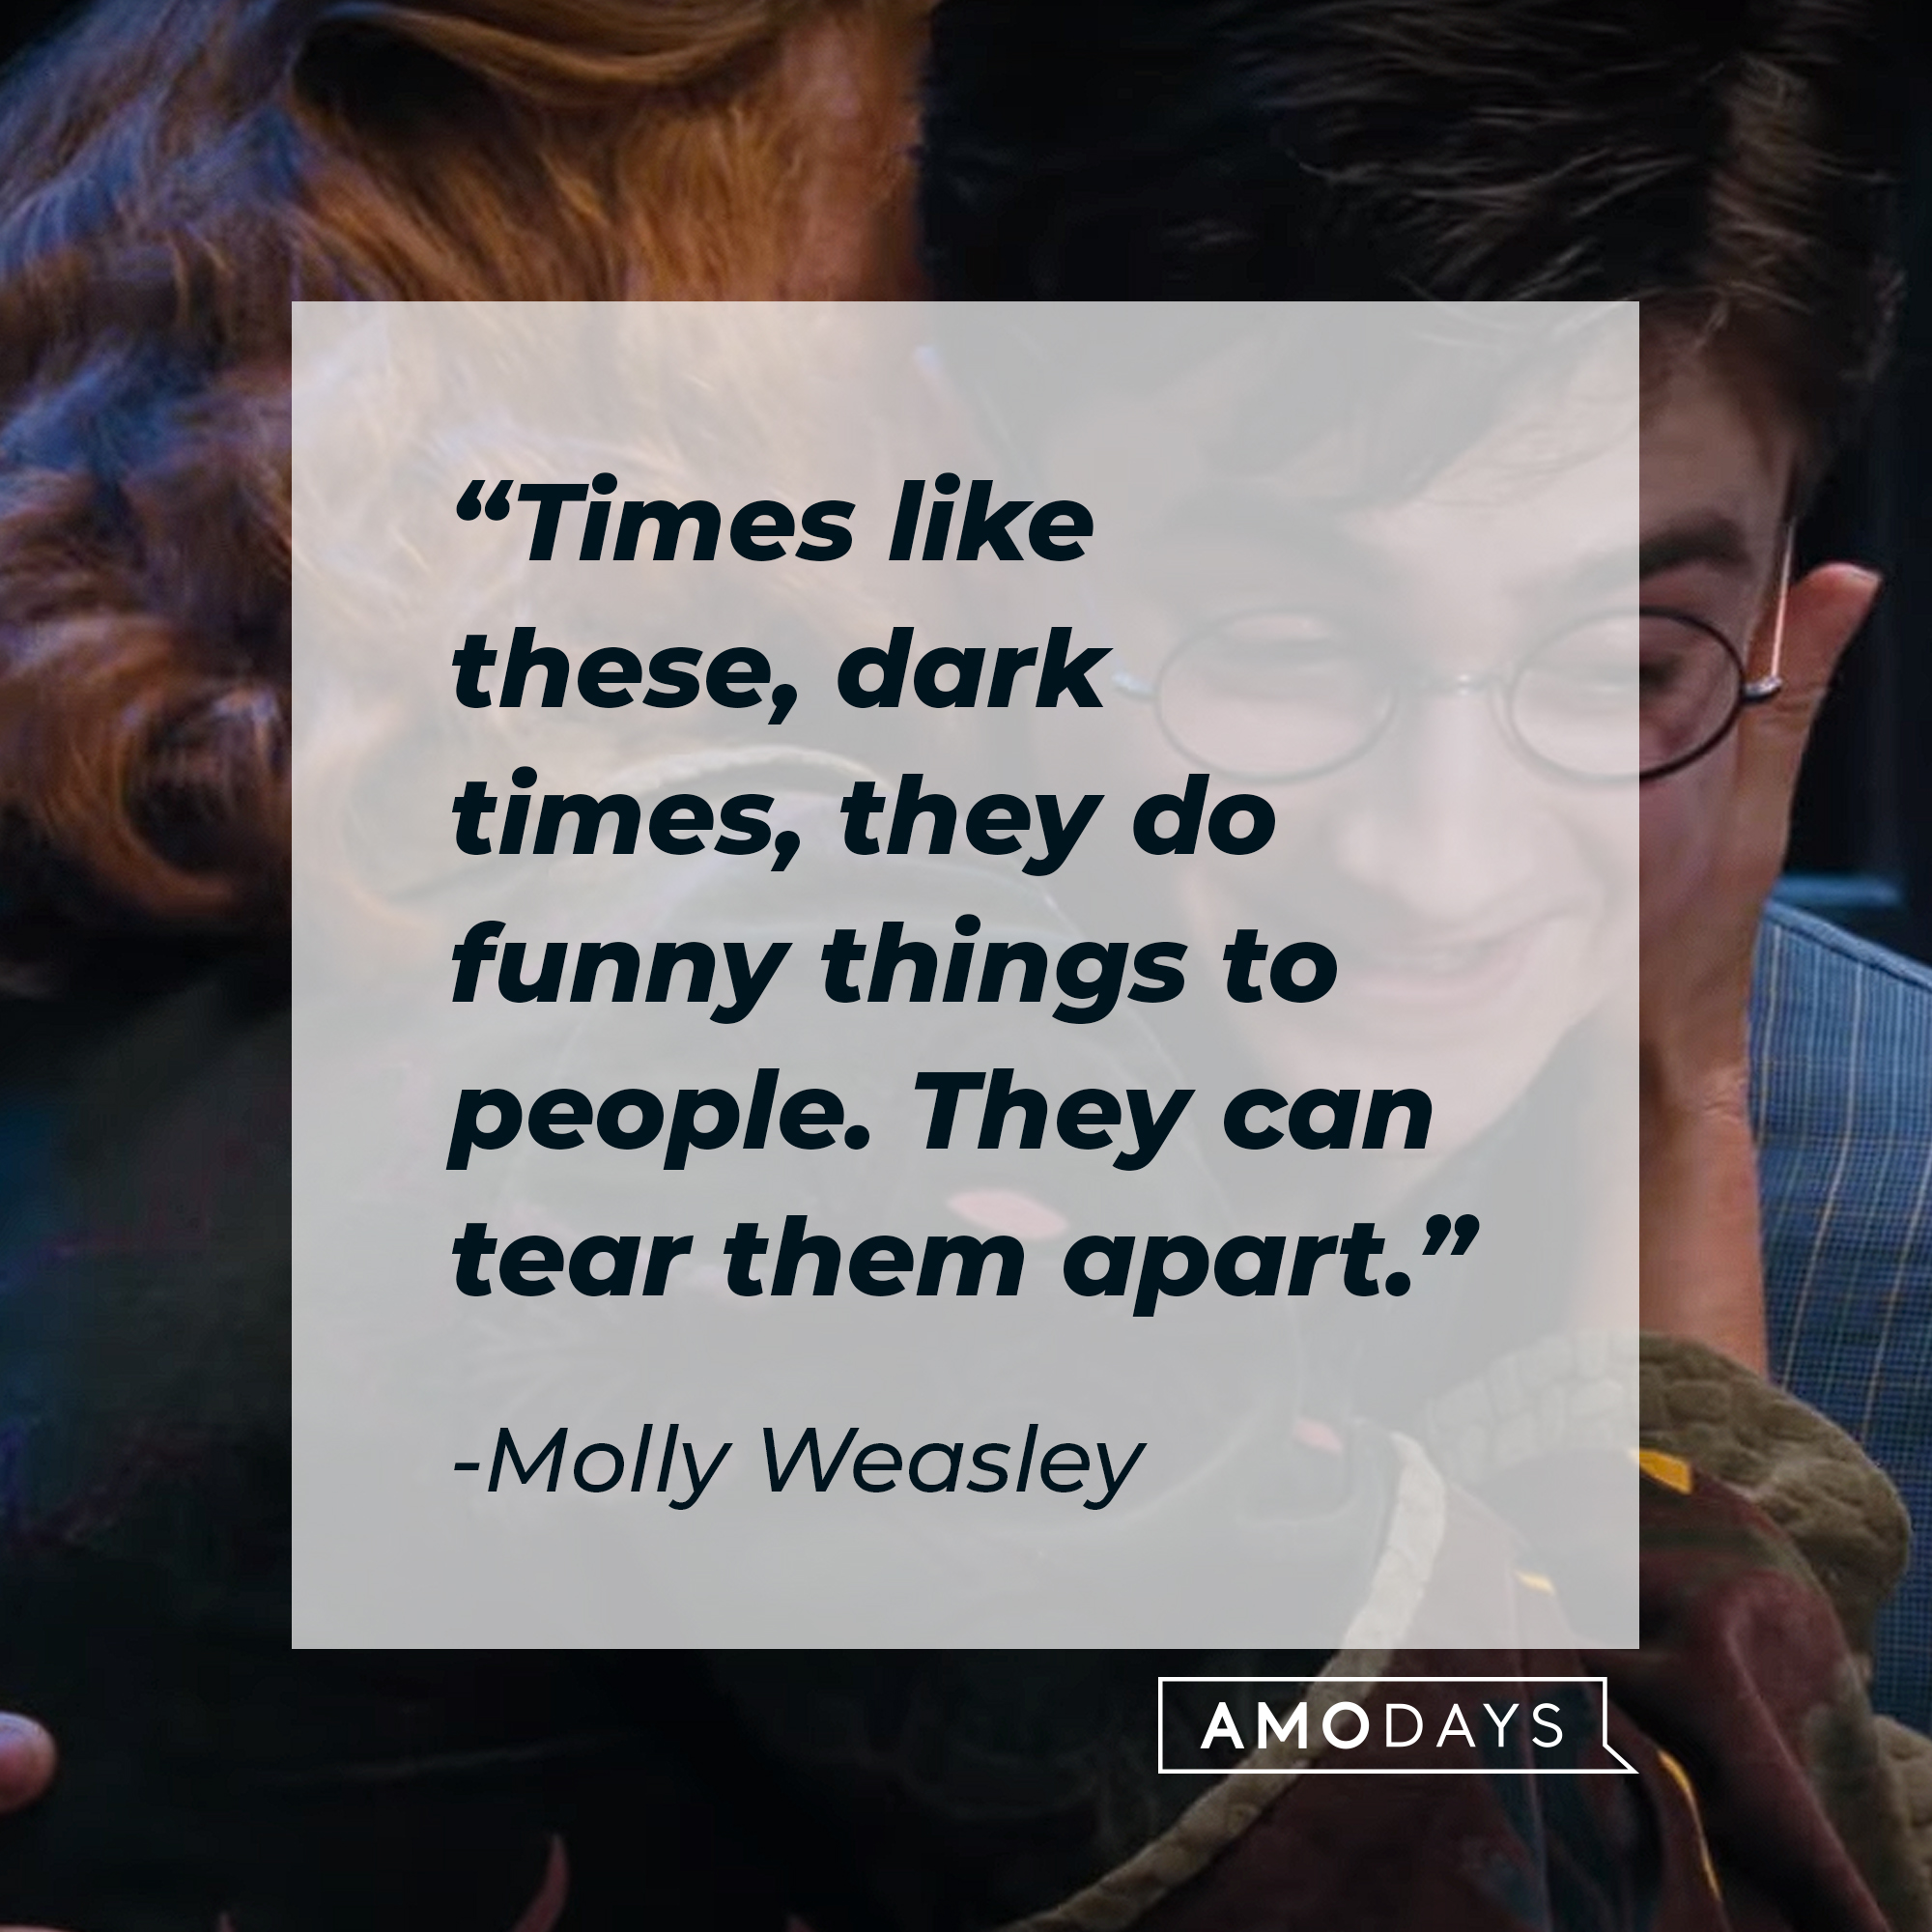 Molly Weasley's quote: "Times like these, dark times, they do funny things to people. They can tear them apart." | Source: Youtube.com/harrypotter